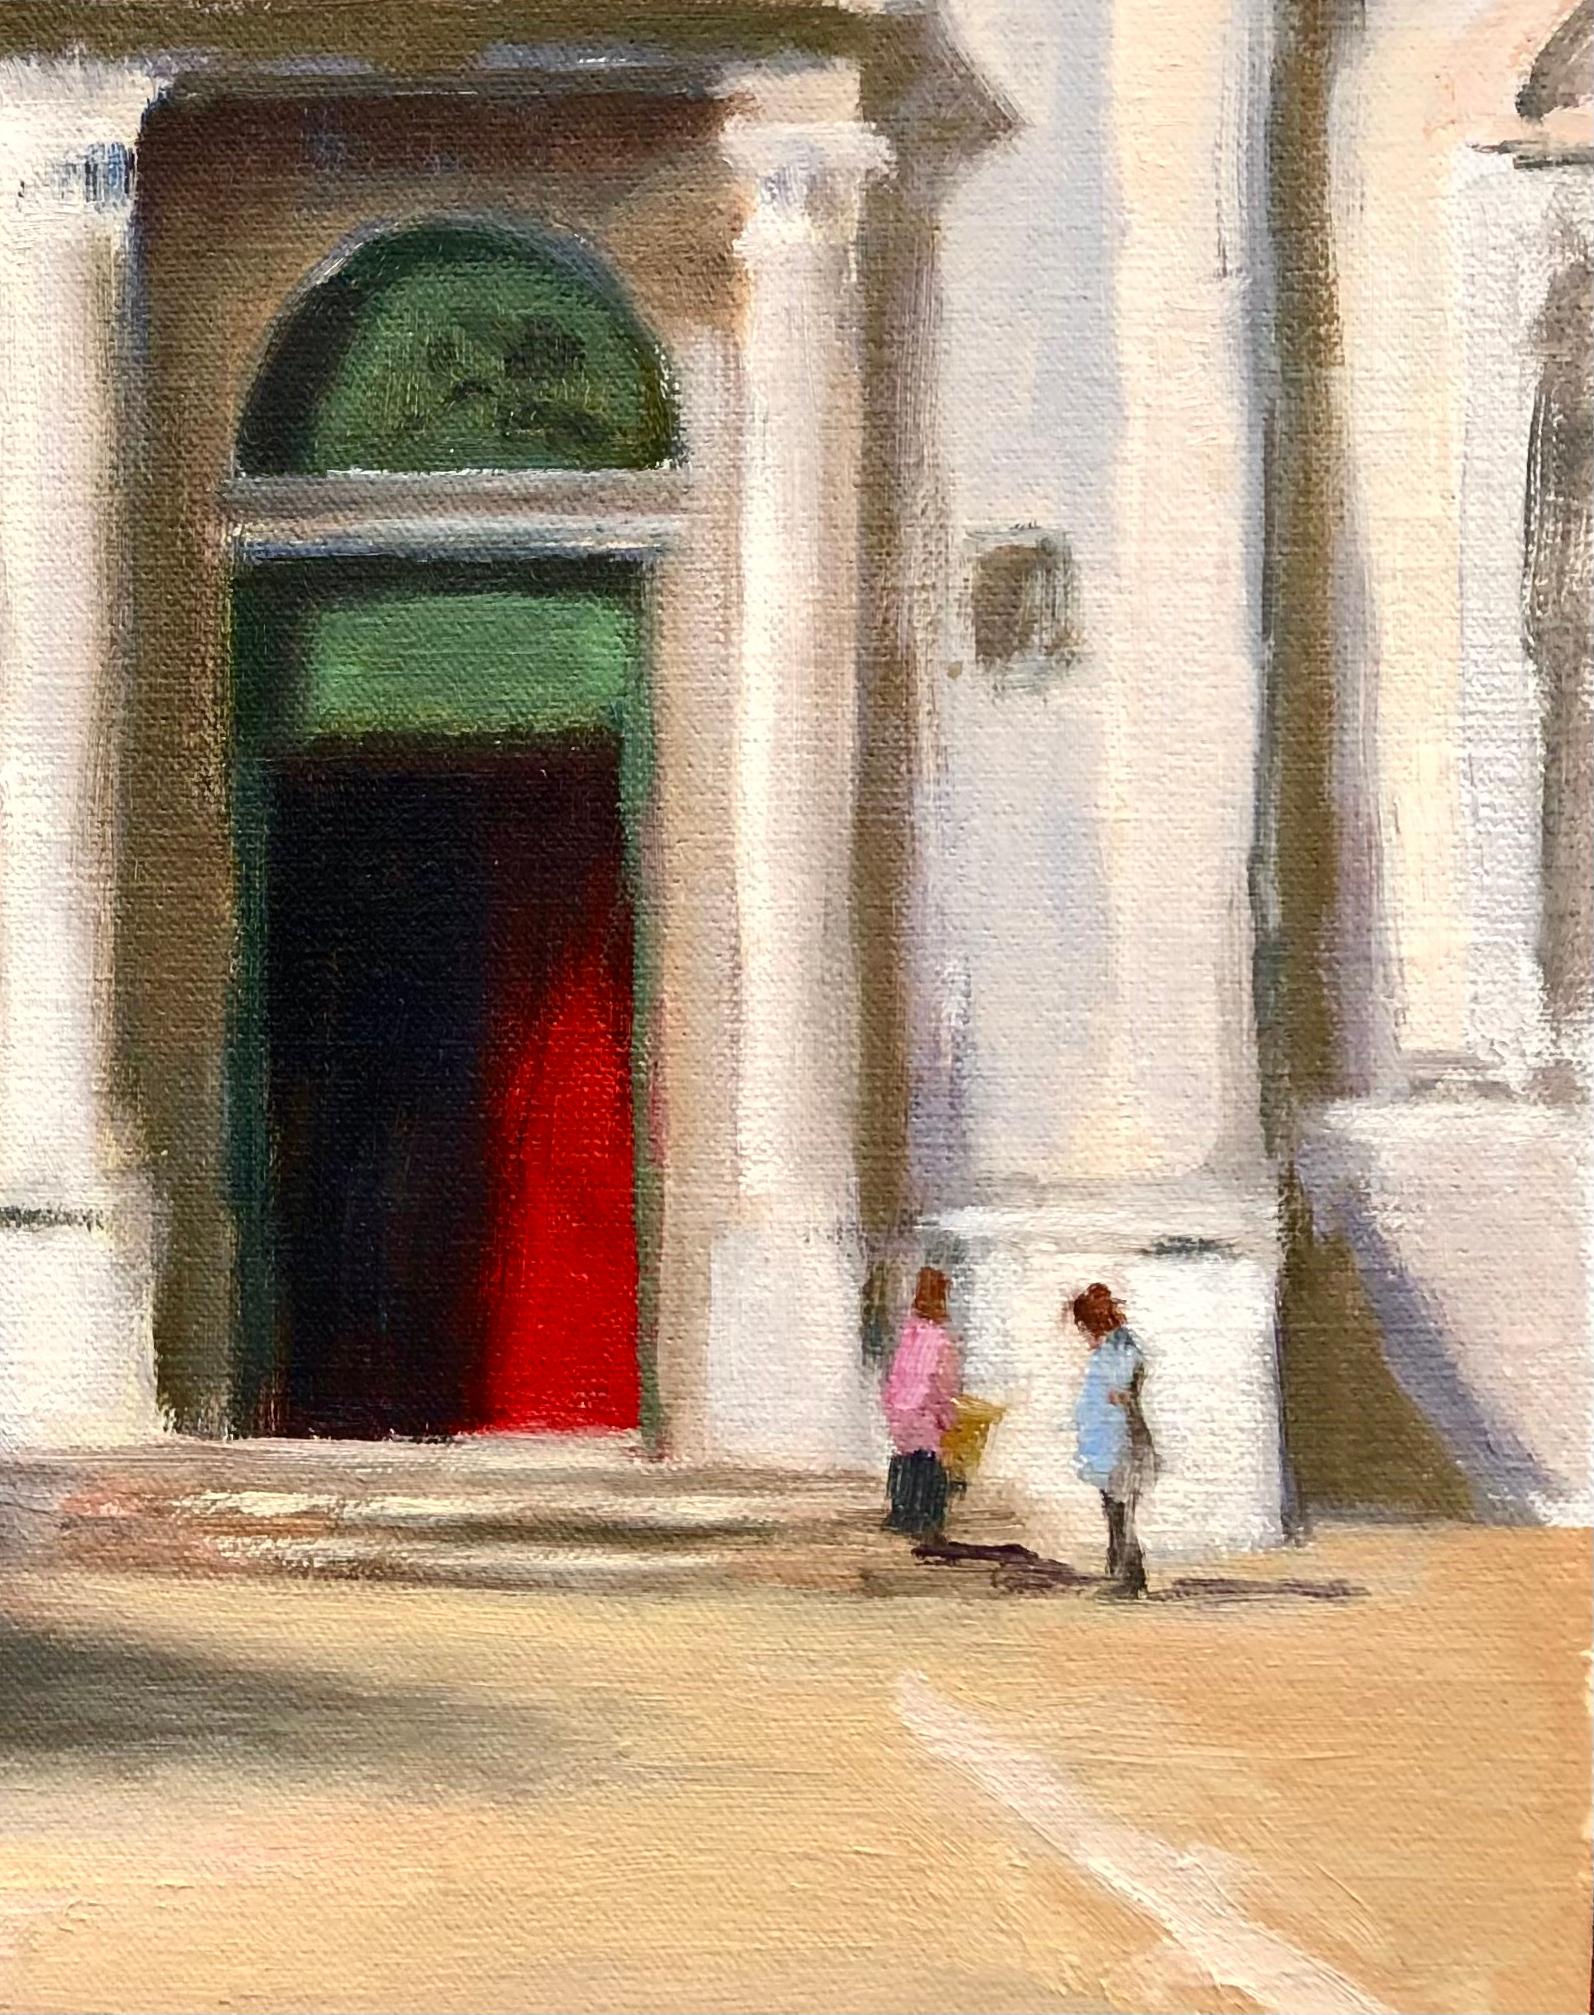 Red Door , Venice Amer. Impressionist Painter, Oil Painters of America, Italy - Painting by Stuart Fullerton